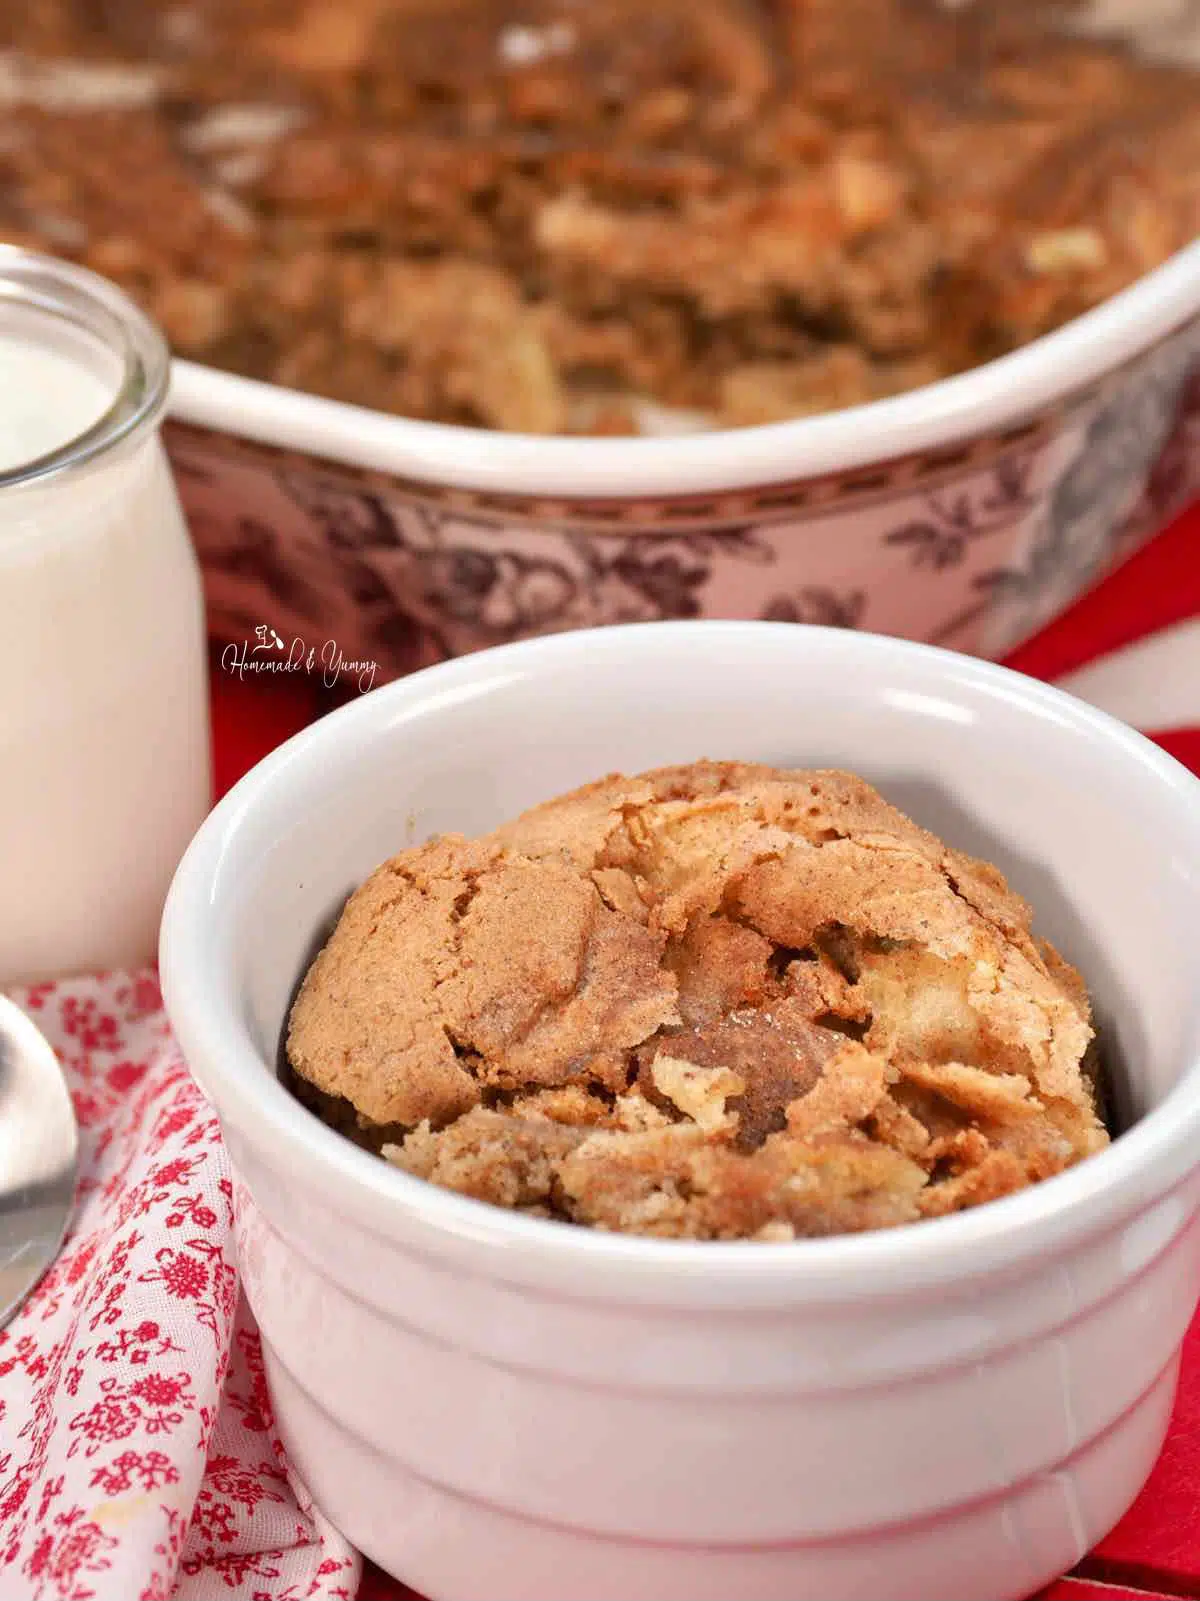 A bowl of warm apple pudding.